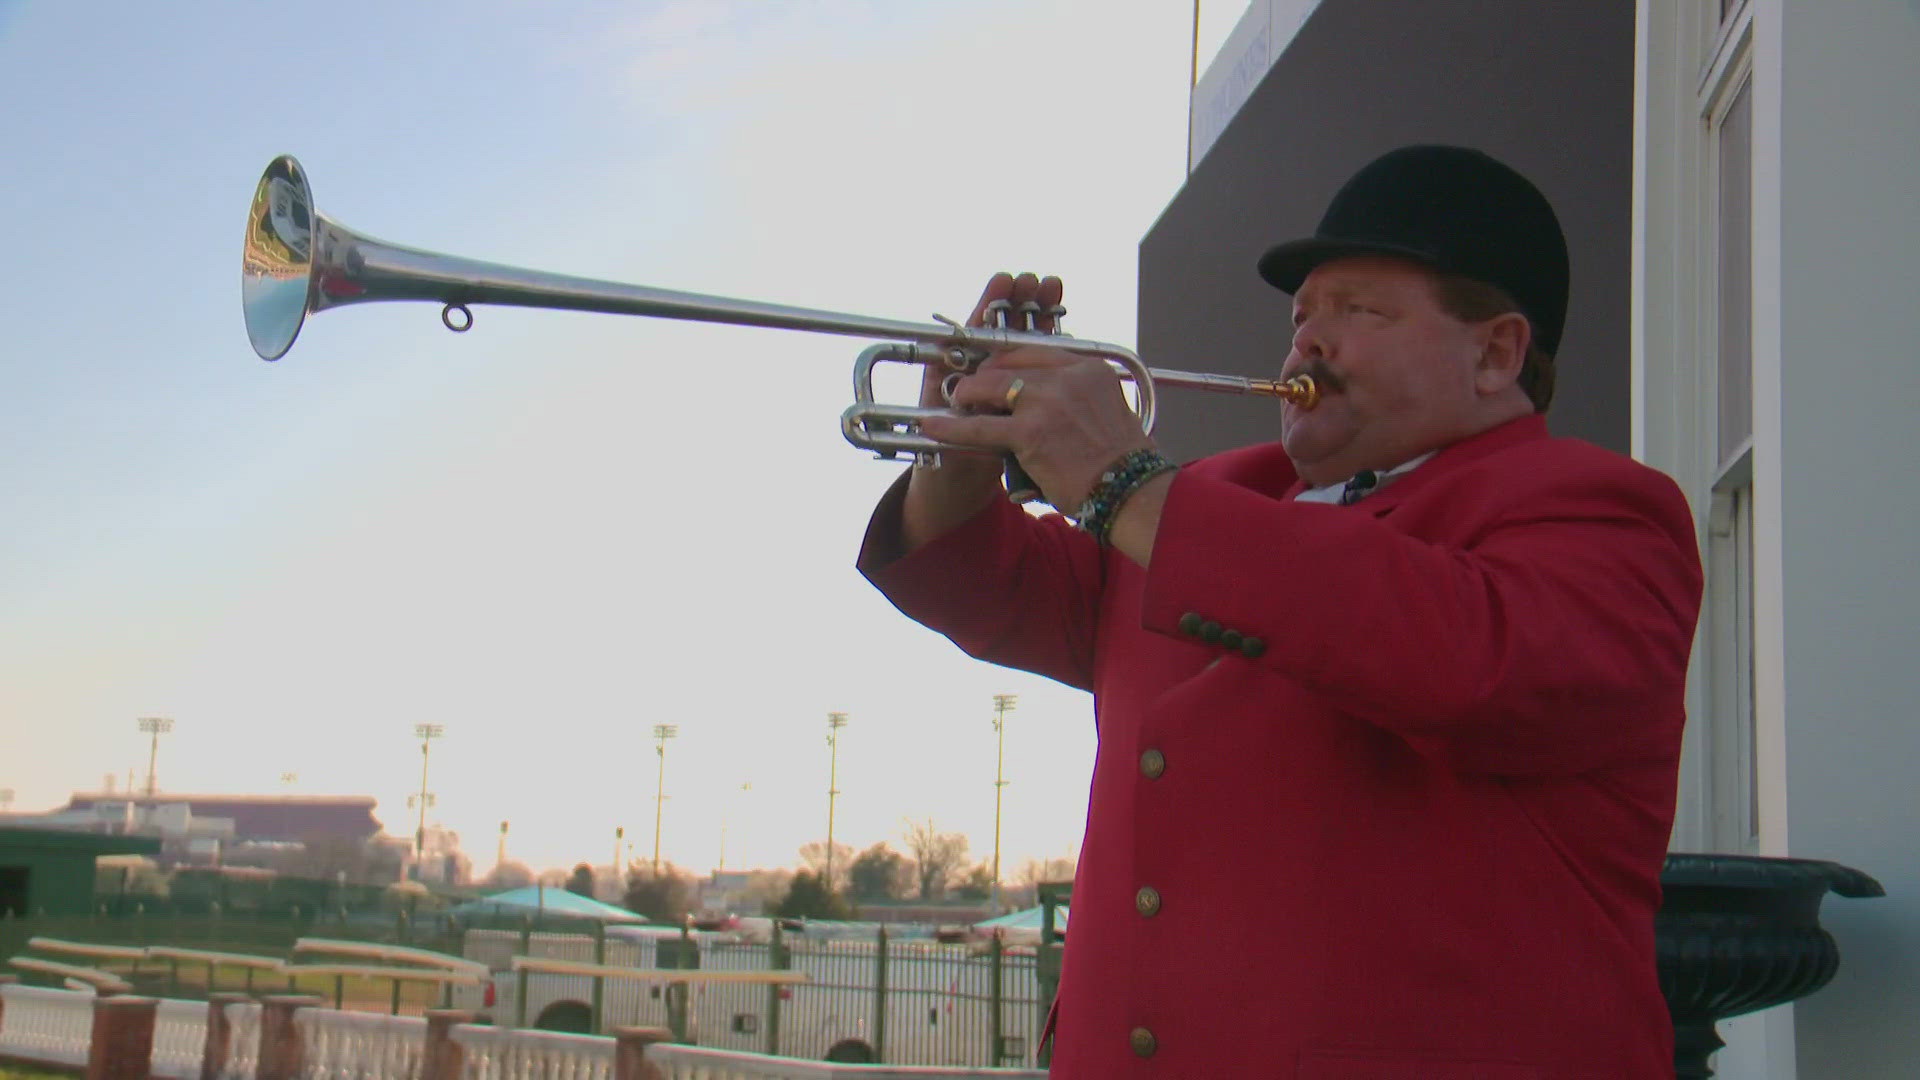 After almost three-decades in this high-pressure position, Steve Buttleman will be the bugler for the 150th Kentucky Derby.